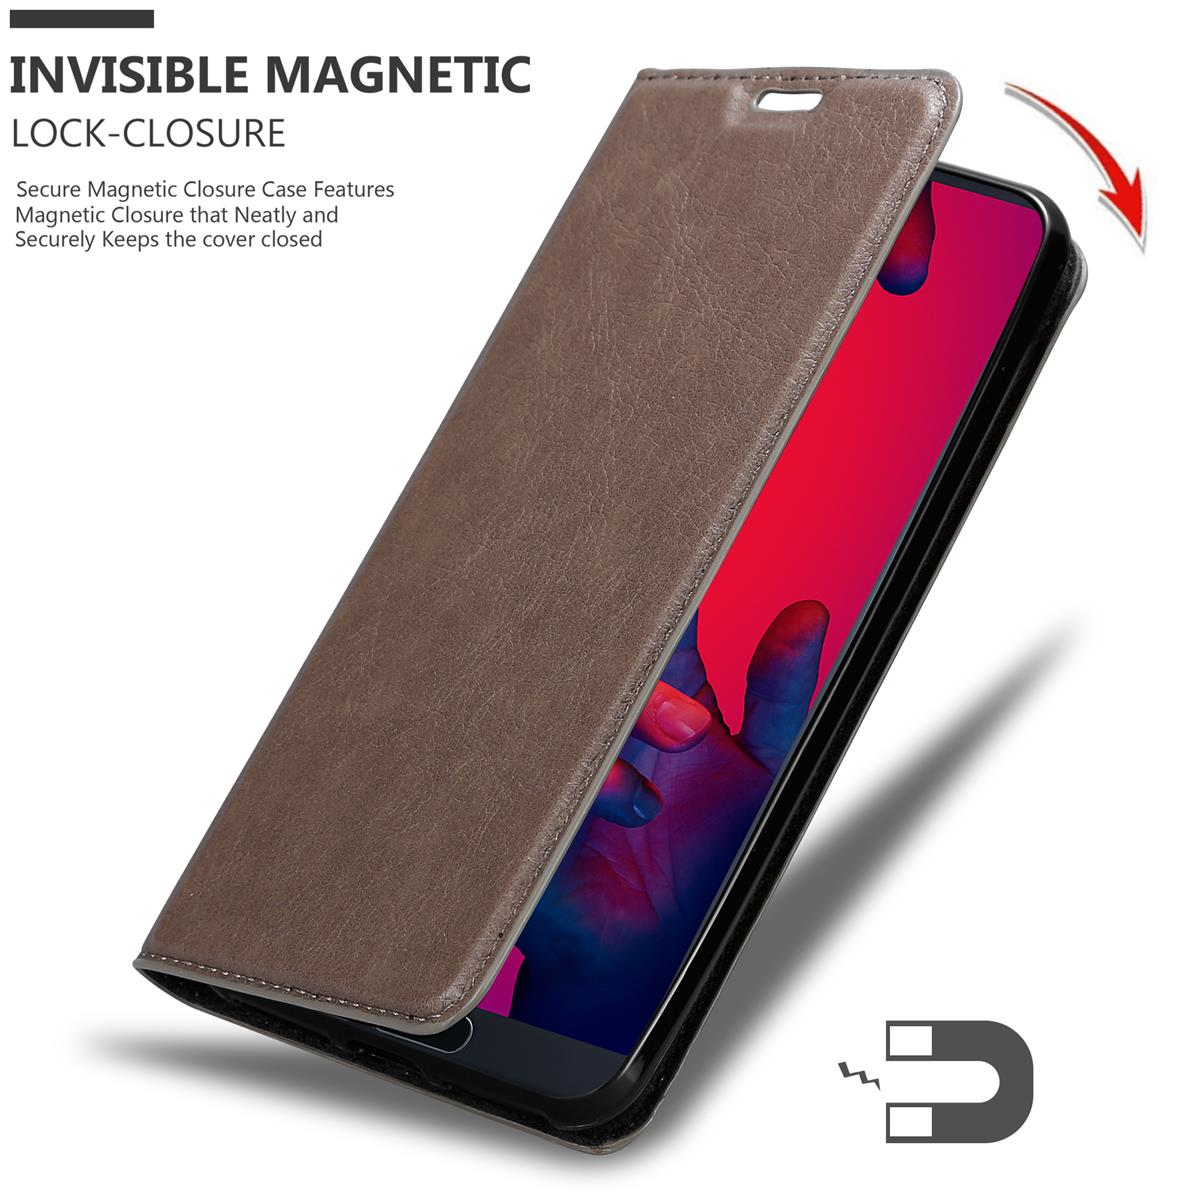 PRO Huawei, P20 Bookcover, PLUS, KAFFEE BRAUN Magnet, / Invisible Book CADORABO P20 Hülle